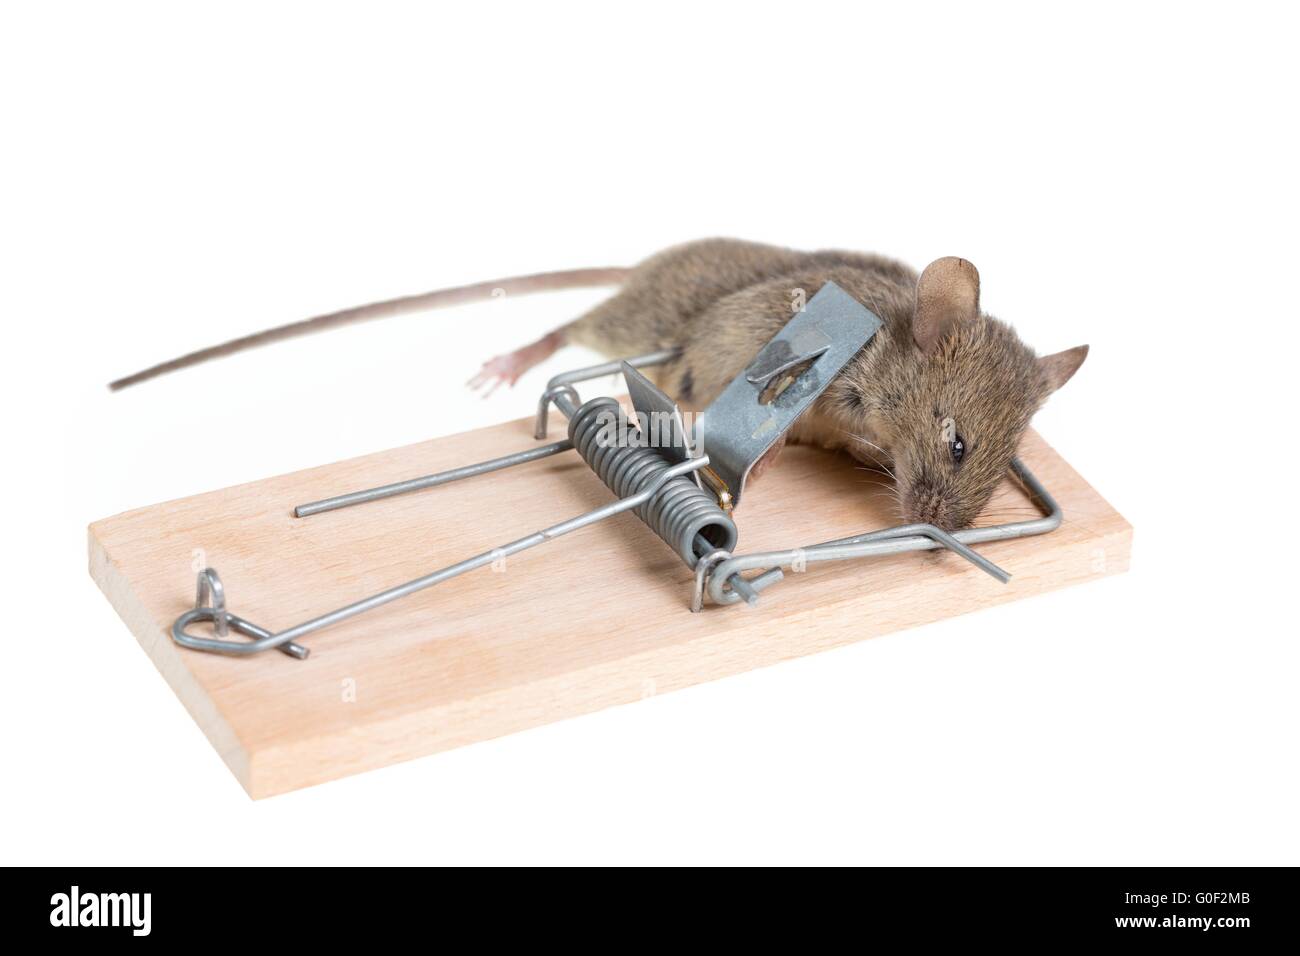 https://c8.alamy.com/comp/G0F2MB/mouse-in-a-mousetrap-G0F2MB.jpg